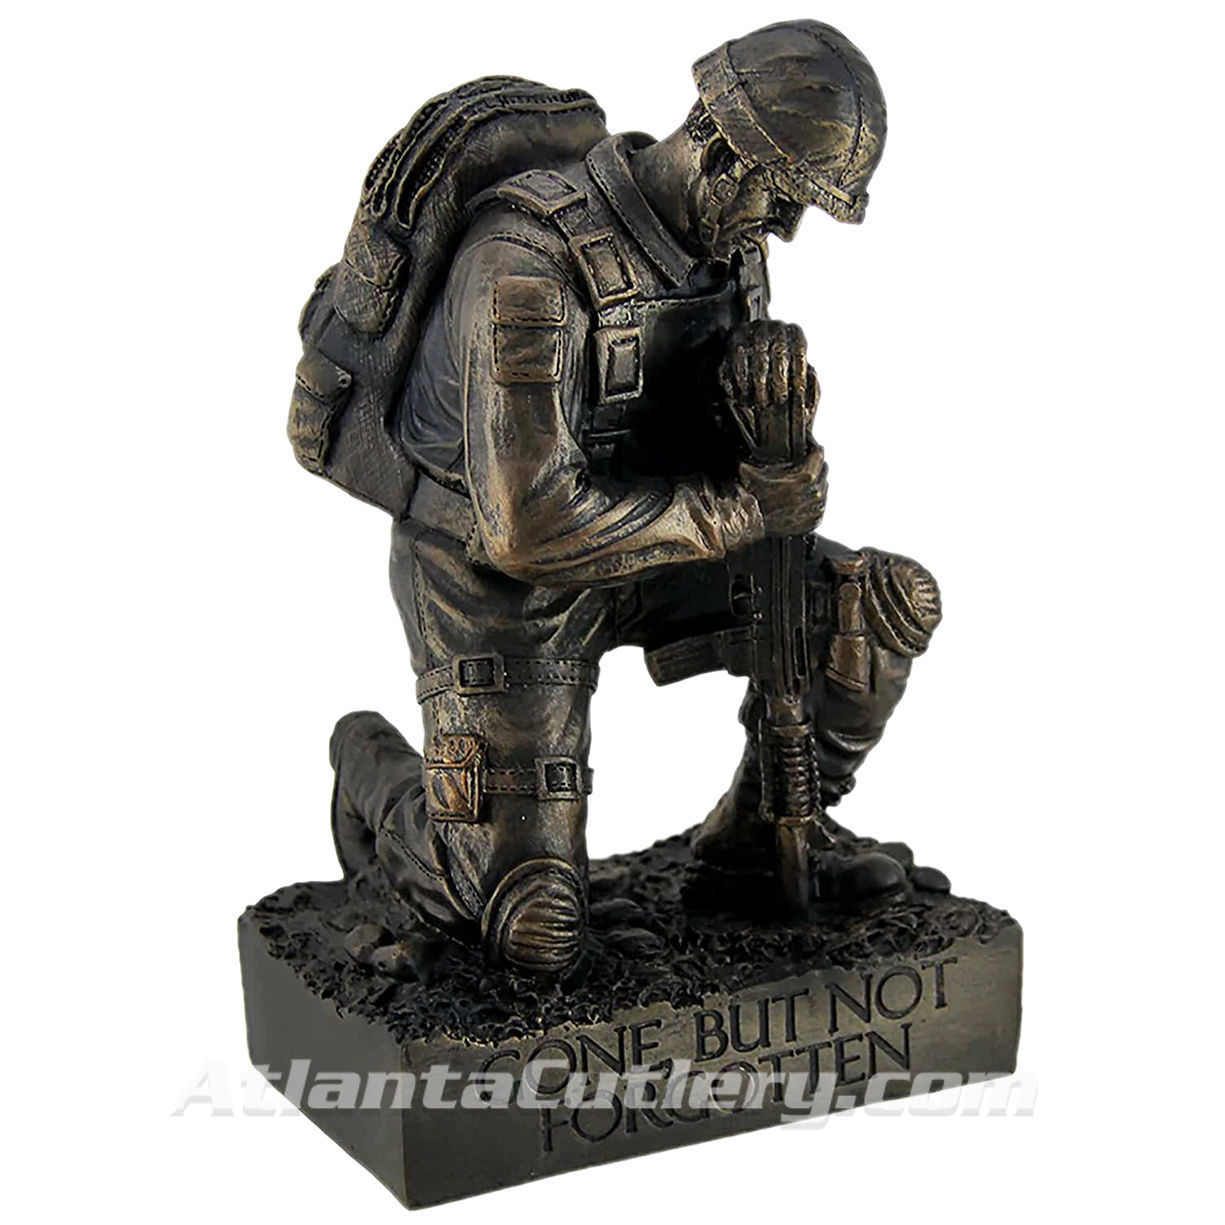 Kneeling soldier statue is resin with bronze finish, a fitting tribute for those who have lost loved ones in the service